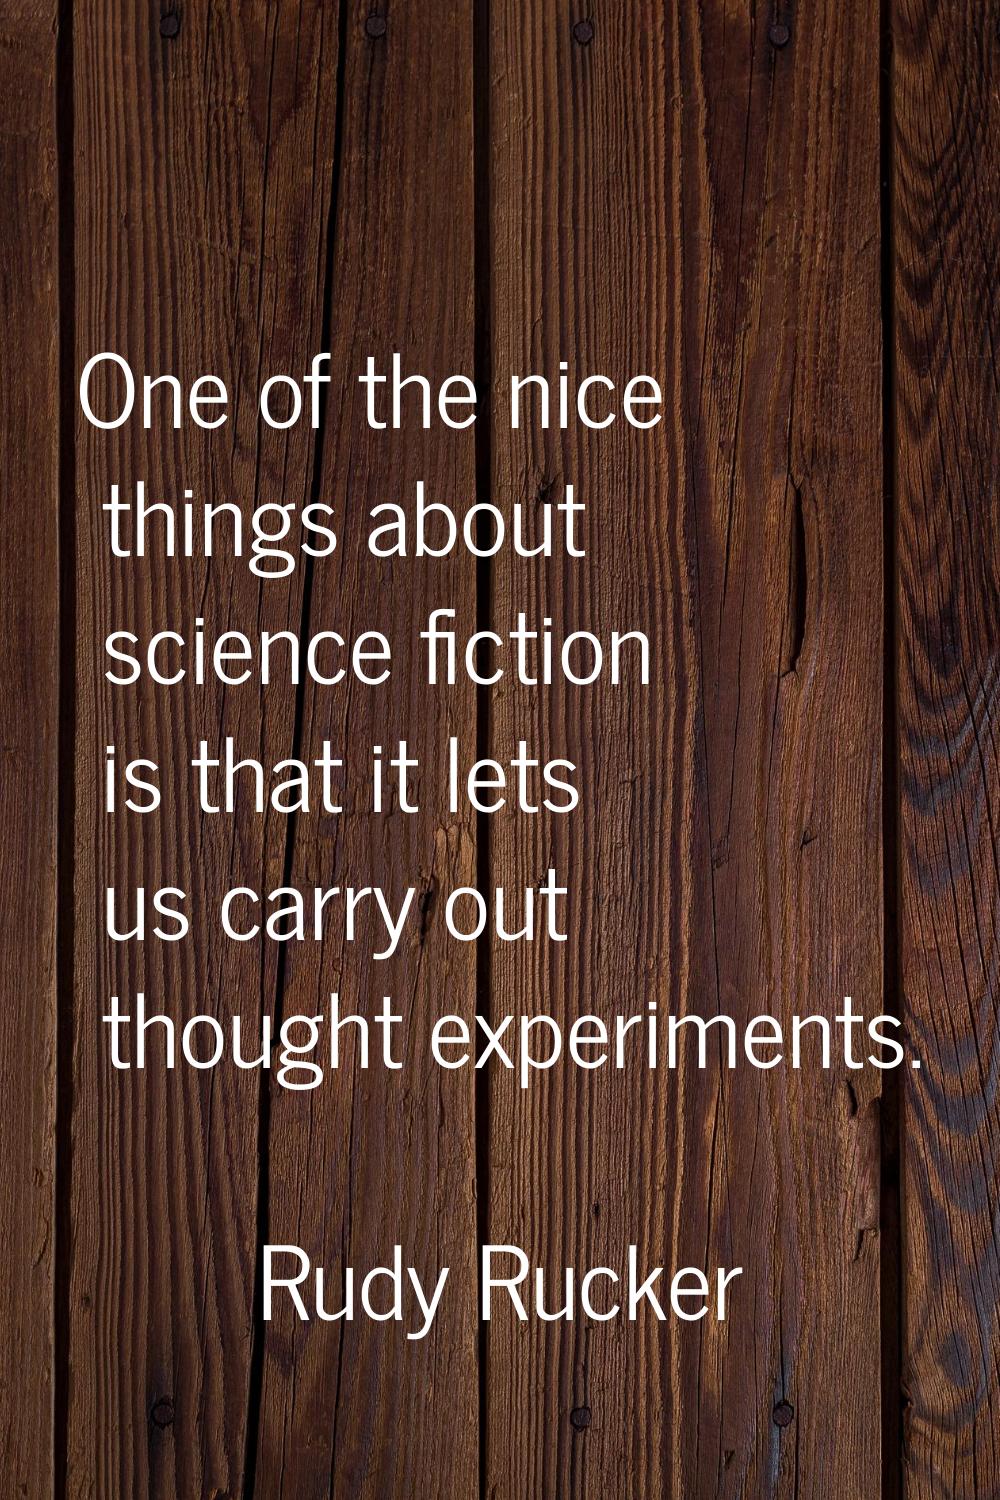 One of the nice things about science fiction is that it lets us carry out thought experiments.